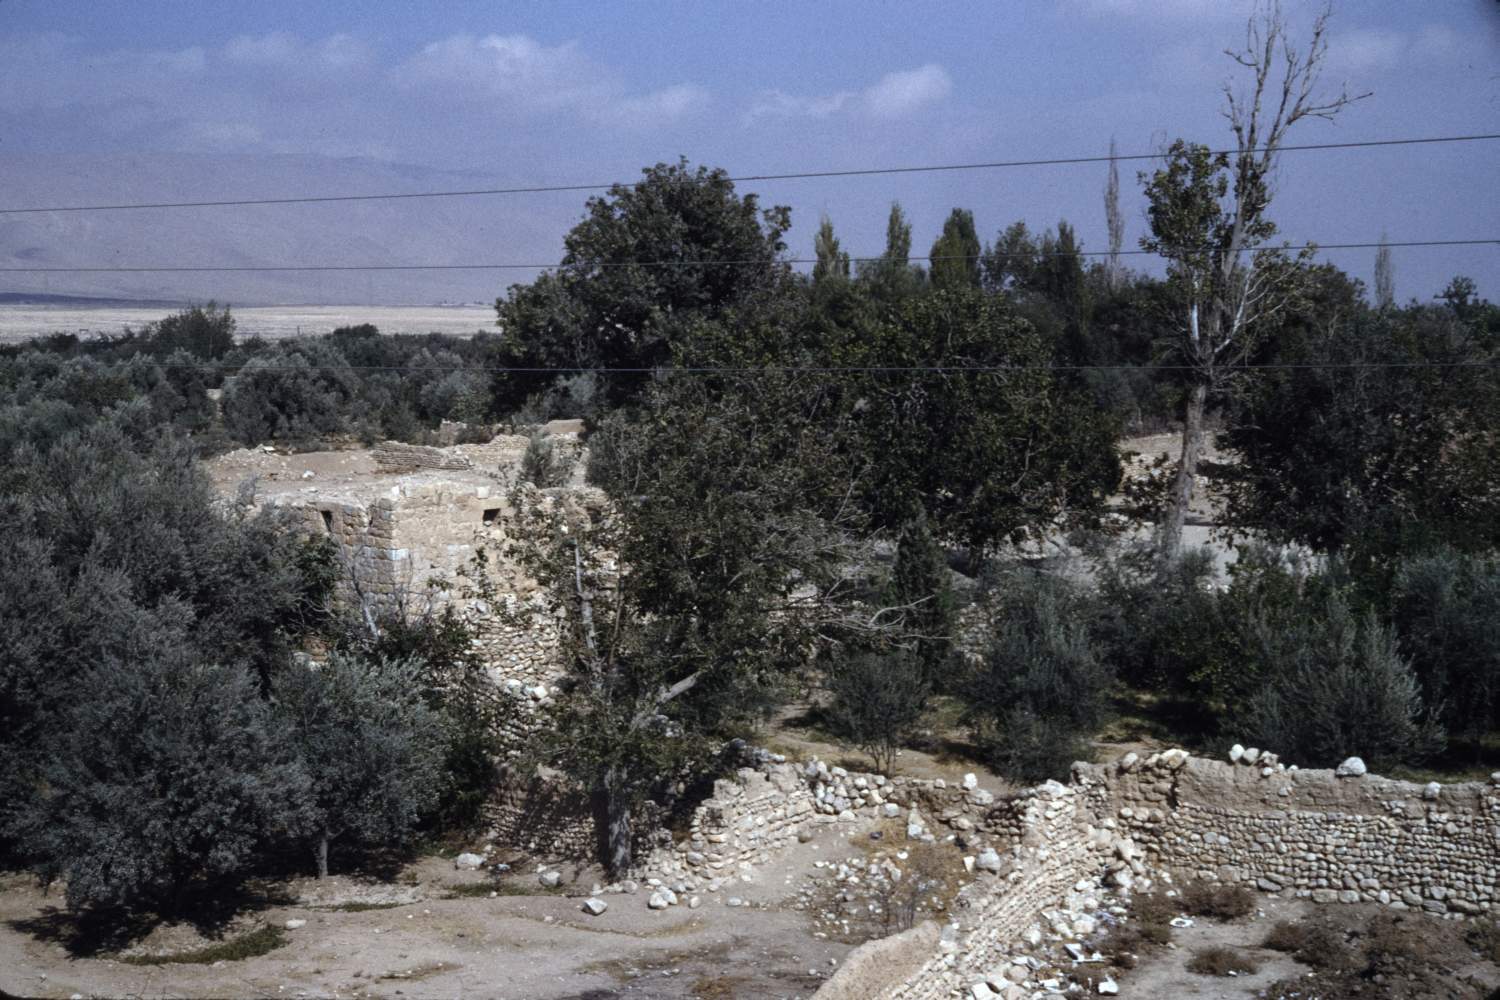 View of ruins in the countryside.